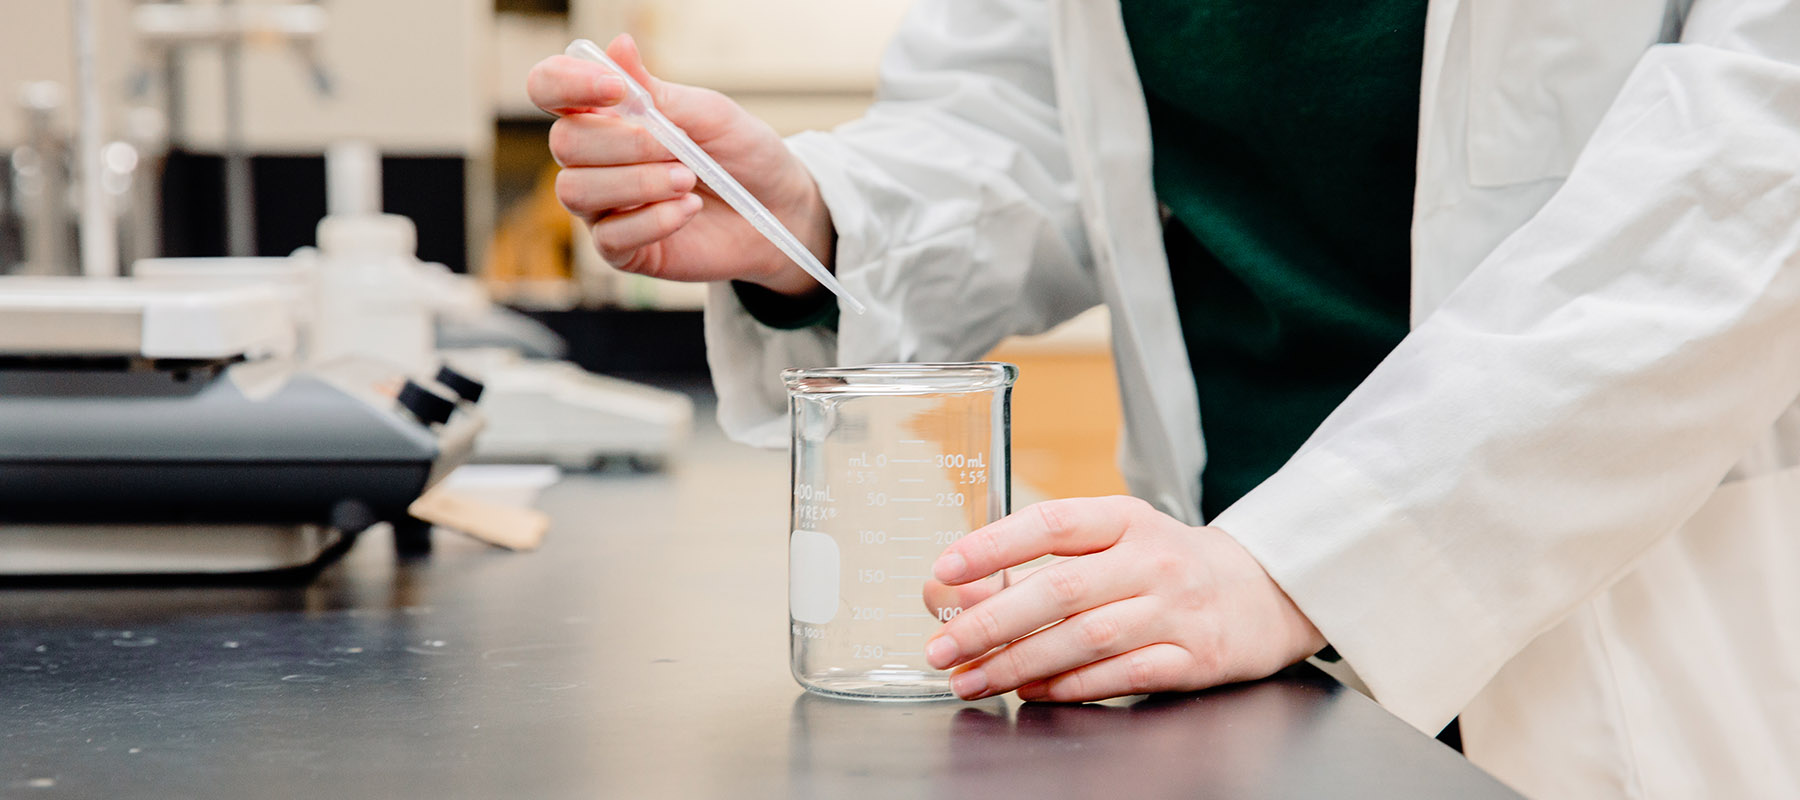 A Normandale chemistry student works with a beaker.